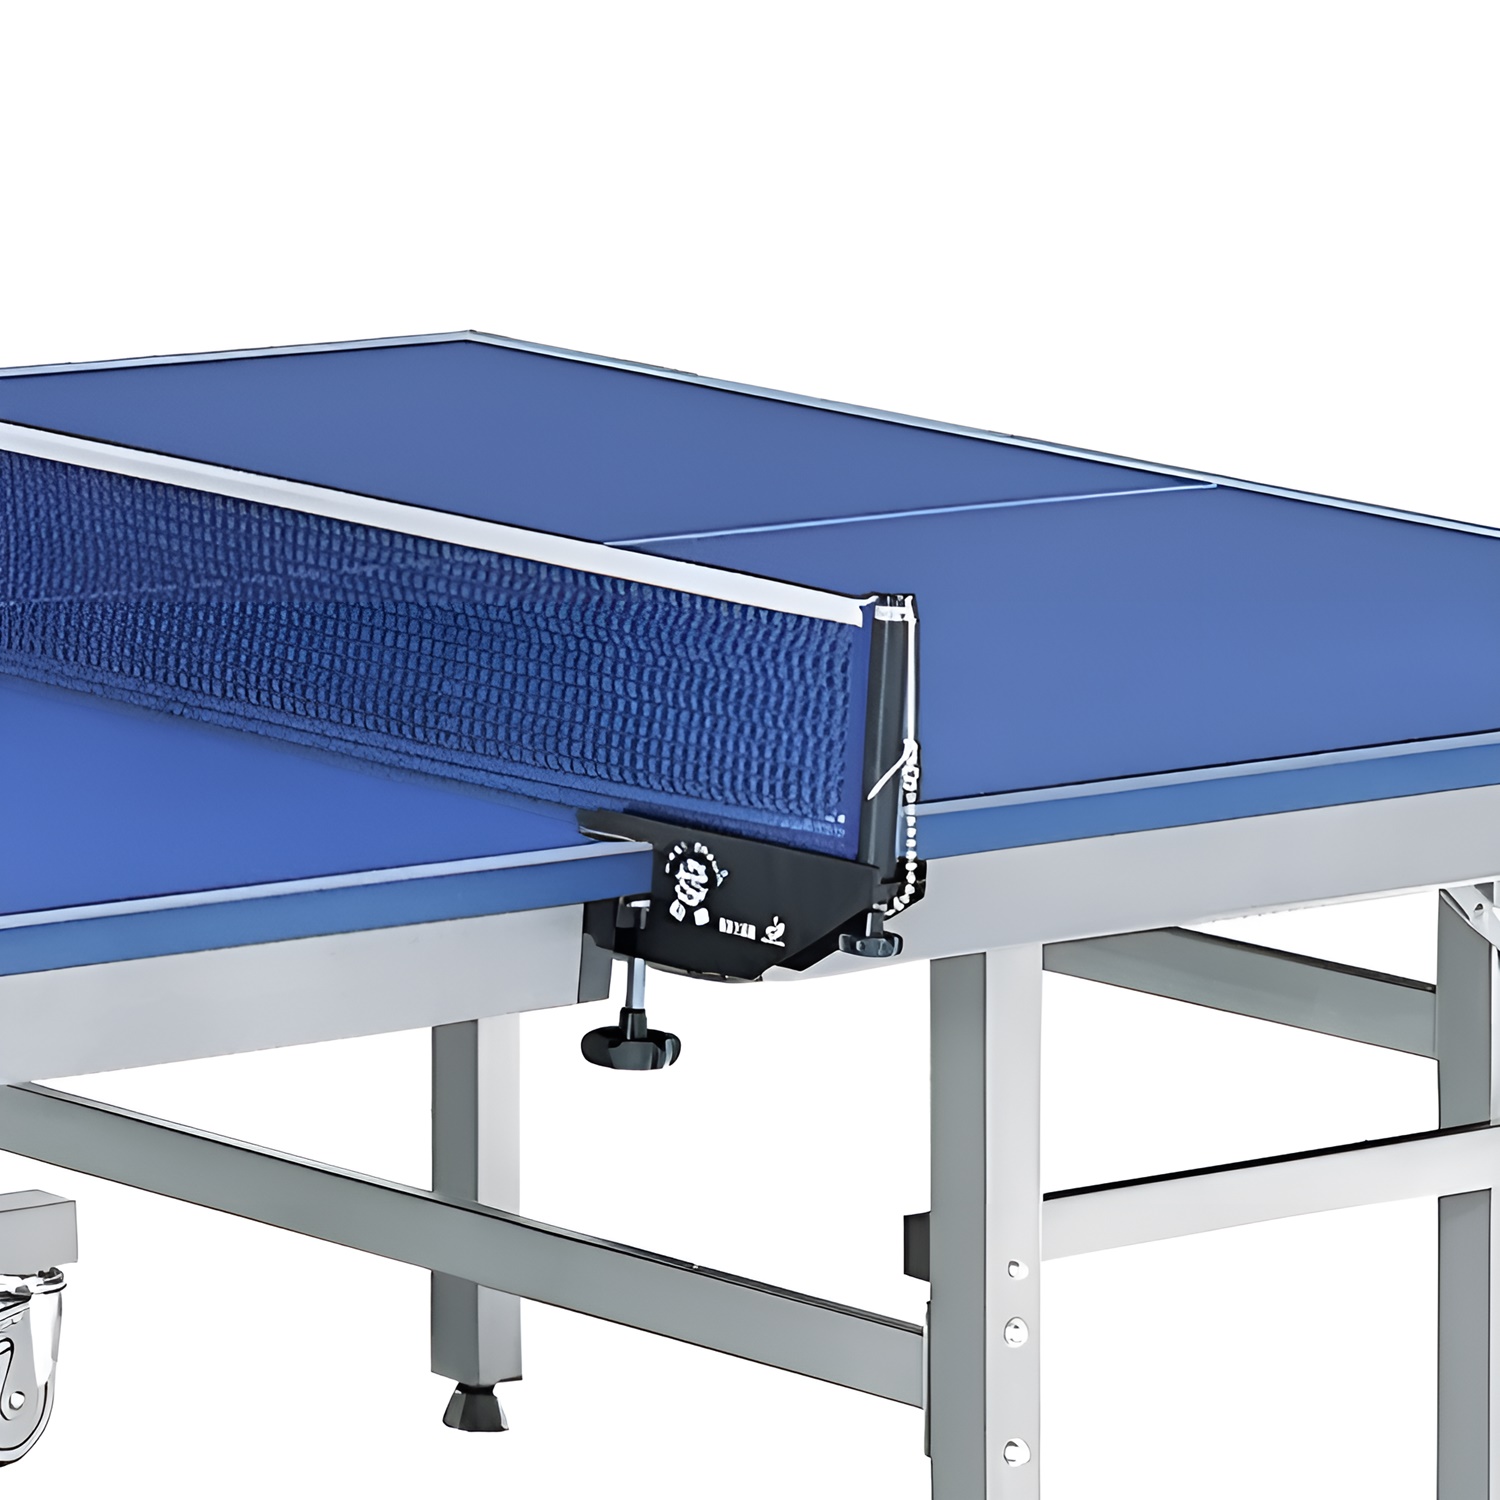 ITTF Approved Table Tennis Table